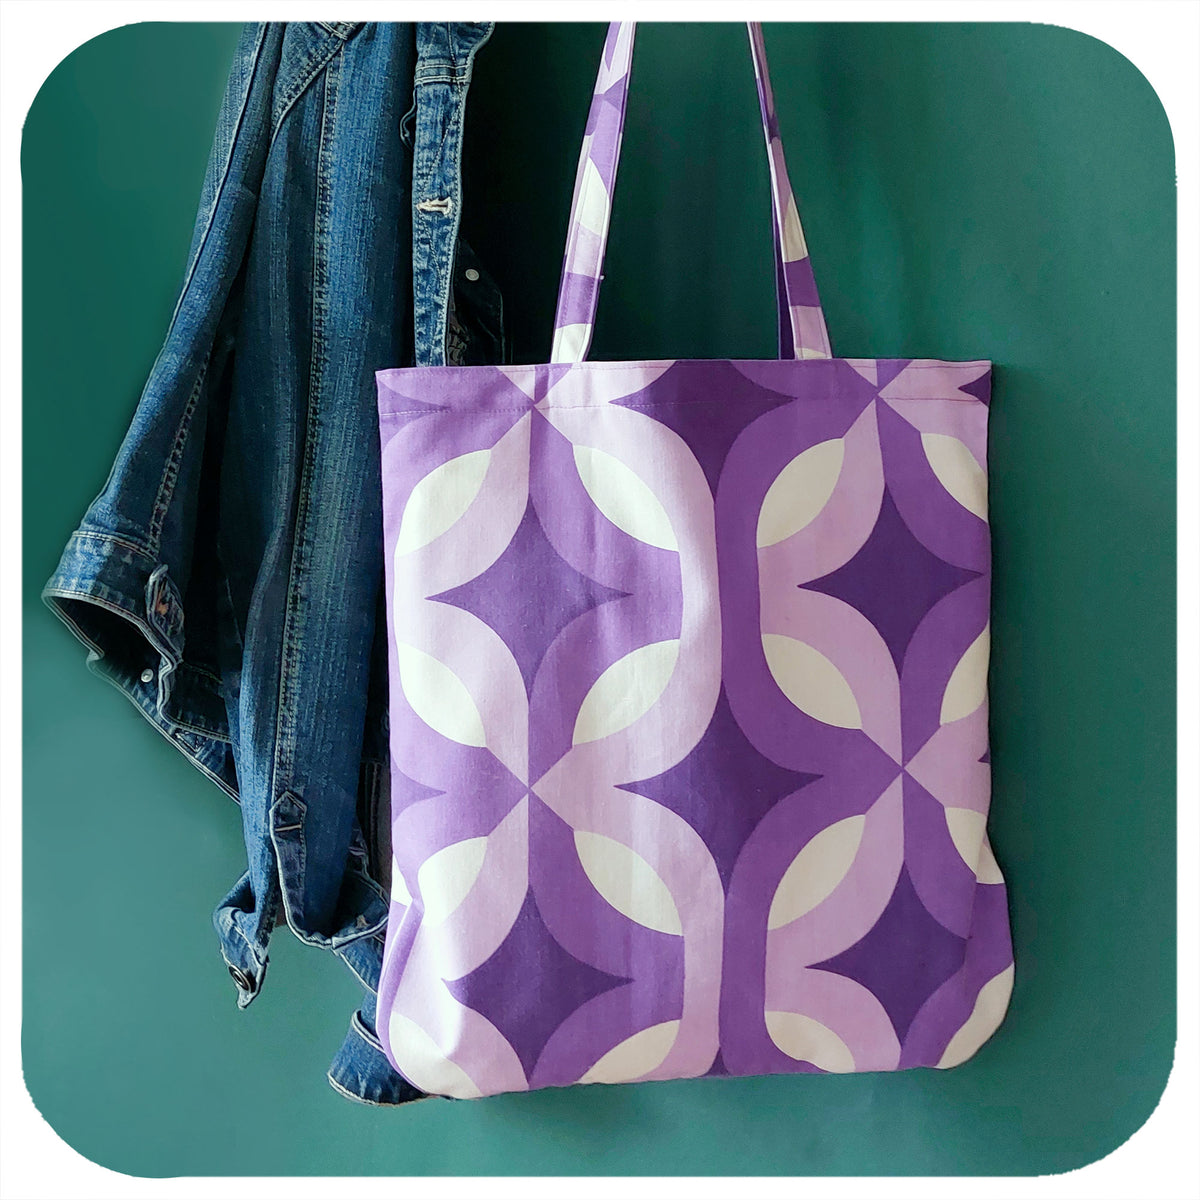 A handmade tote bag, made from vintage 70s fabric, with an Op Art pattern in purple & white, hangs against a green wall next to denim jacket | The Inkabilly Emporium